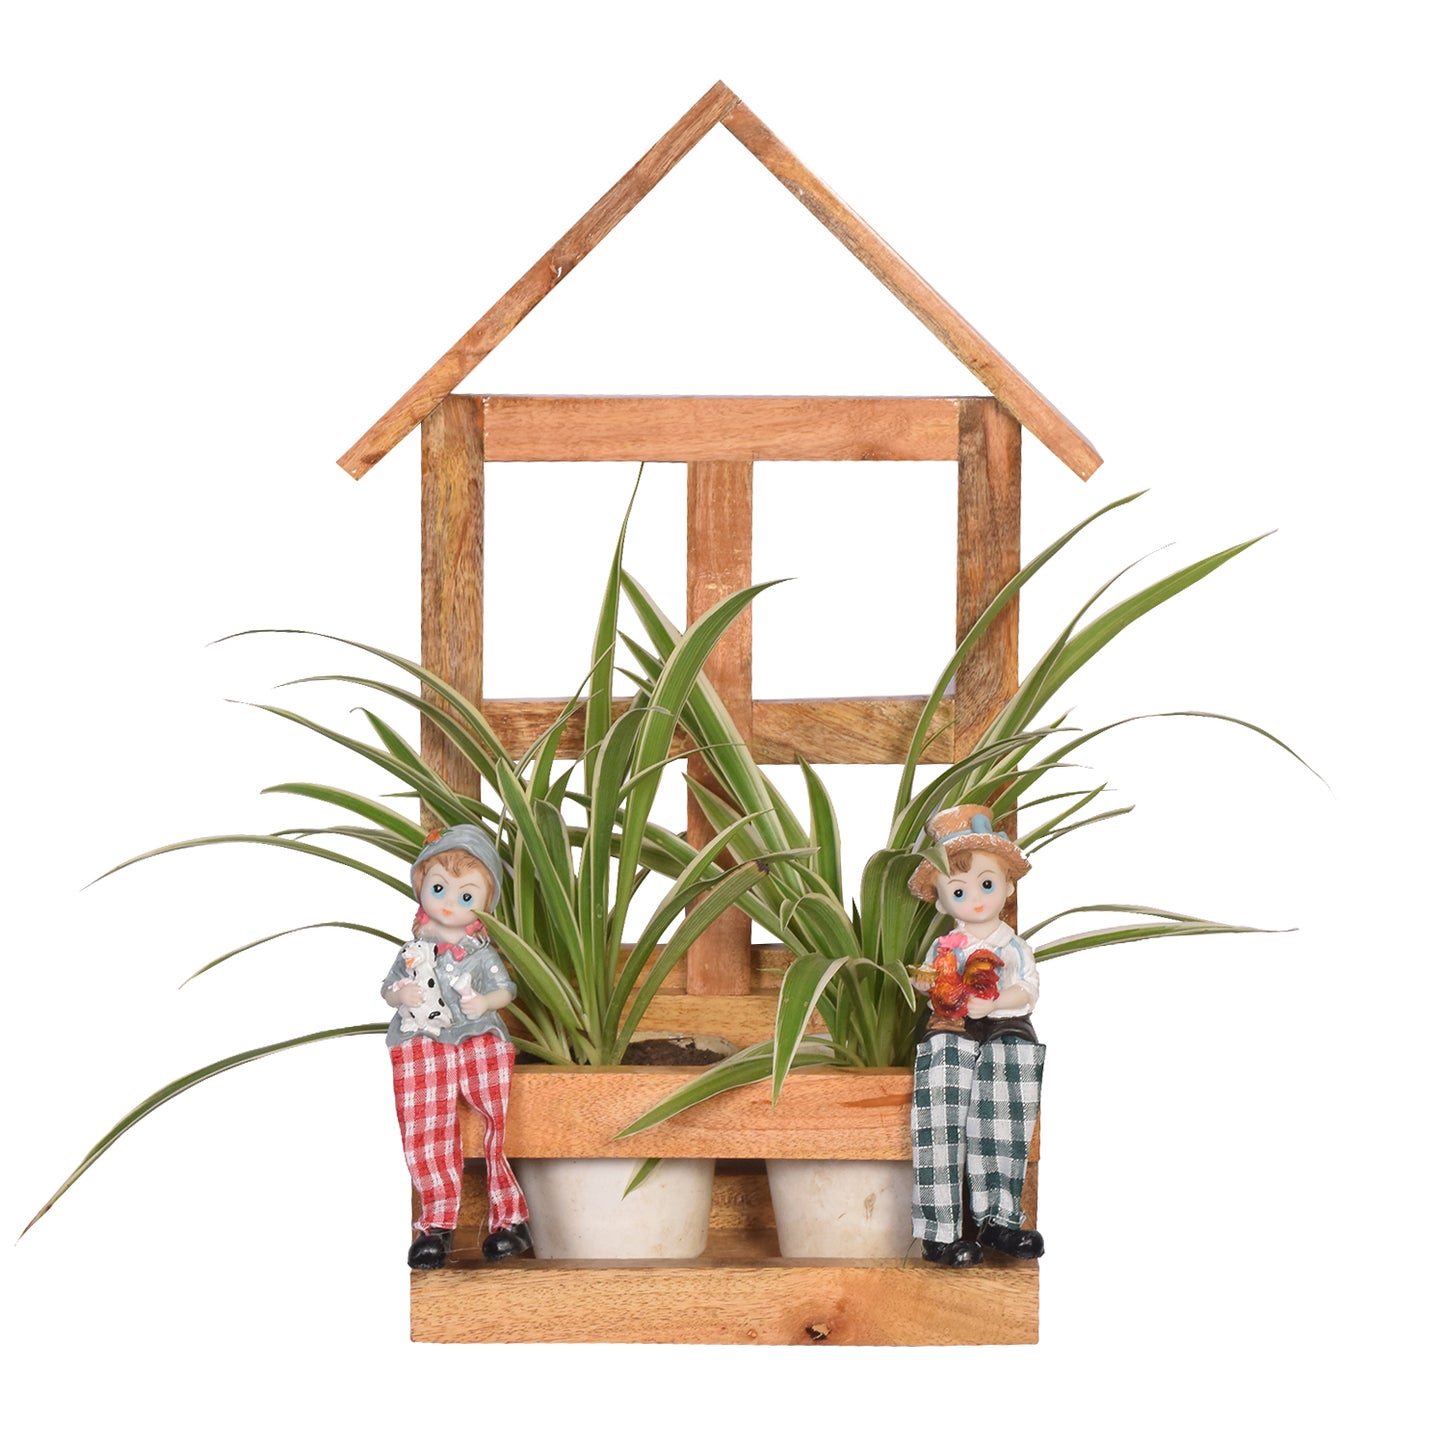 The Weaver's Nest Wooden Old Couple Planter for Home and Garden